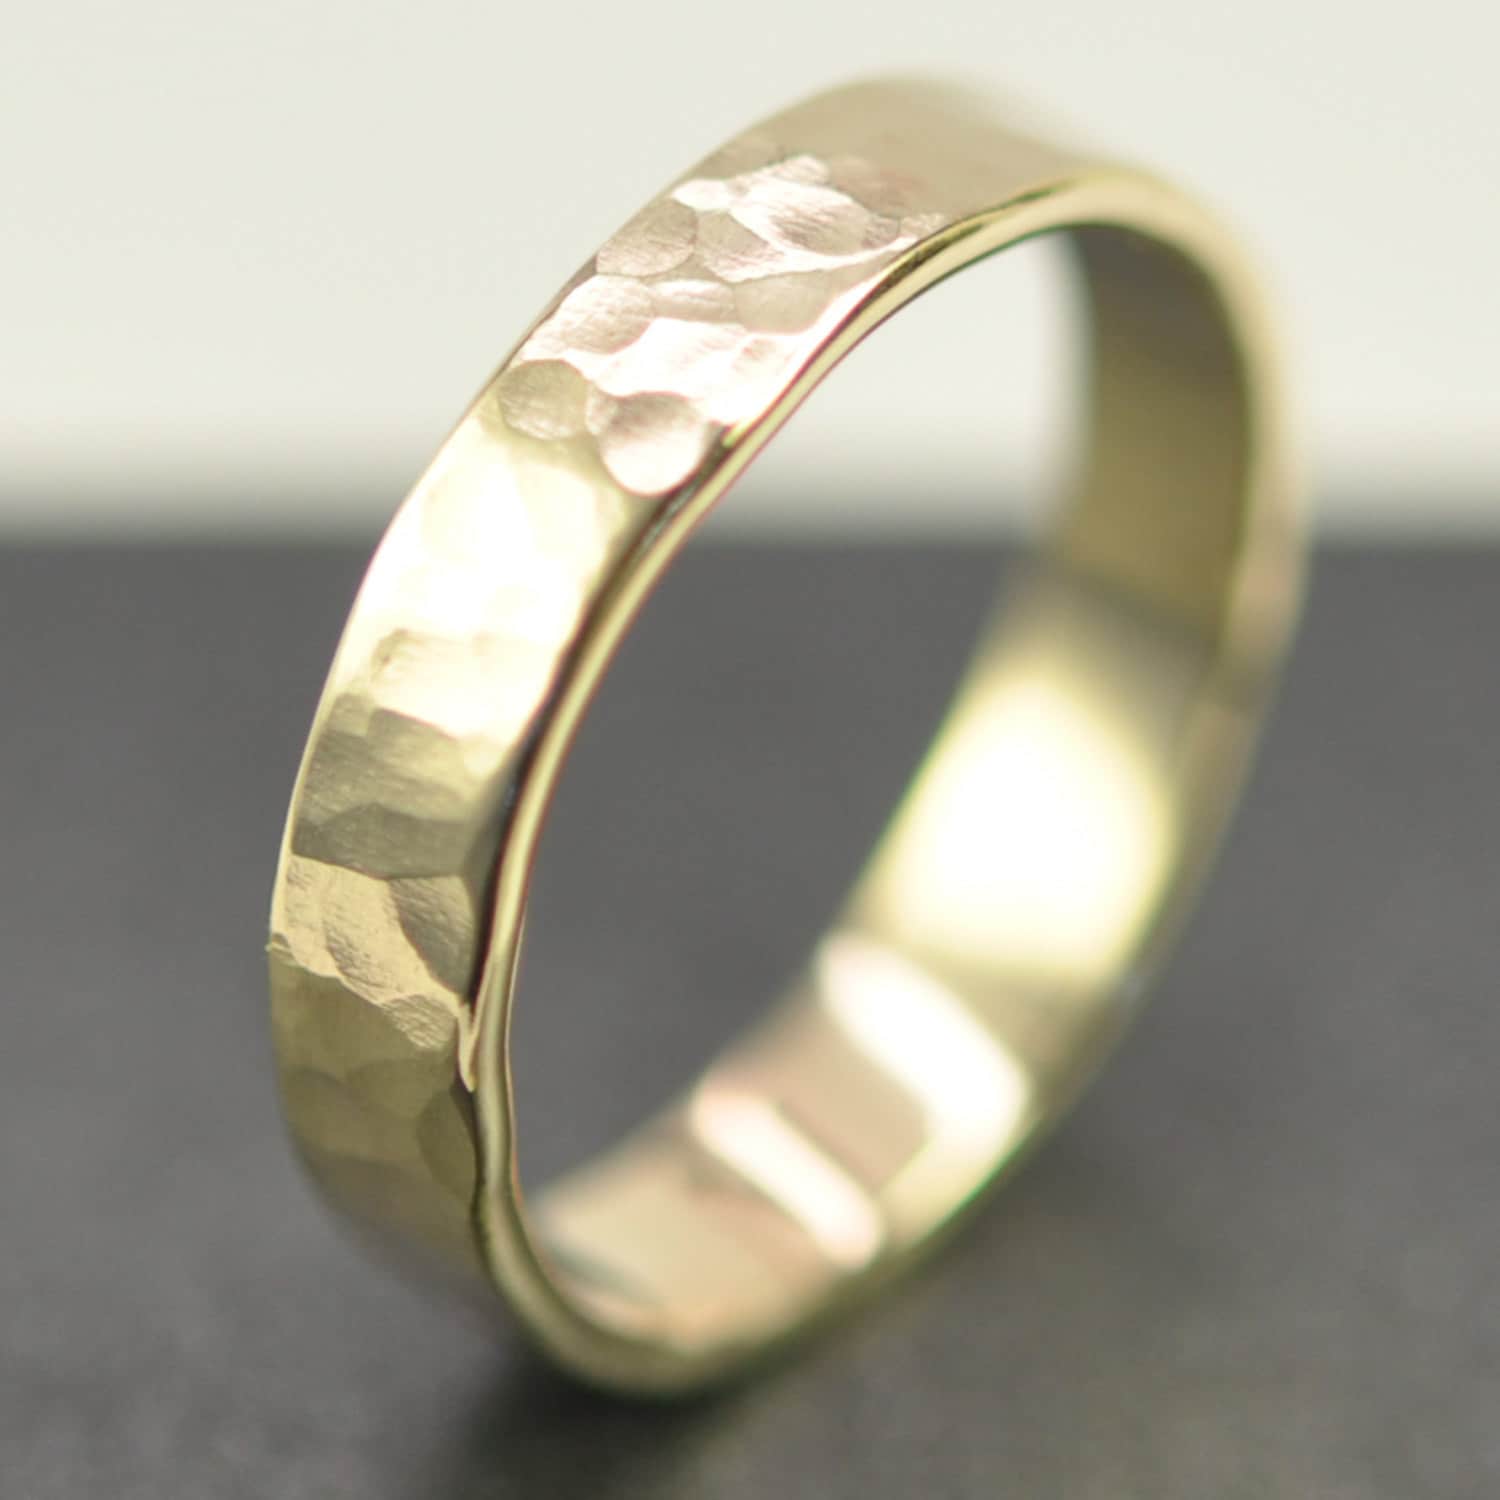 Solid 14K Yellow Gold 4mm Band or Wedding Ring Hammered